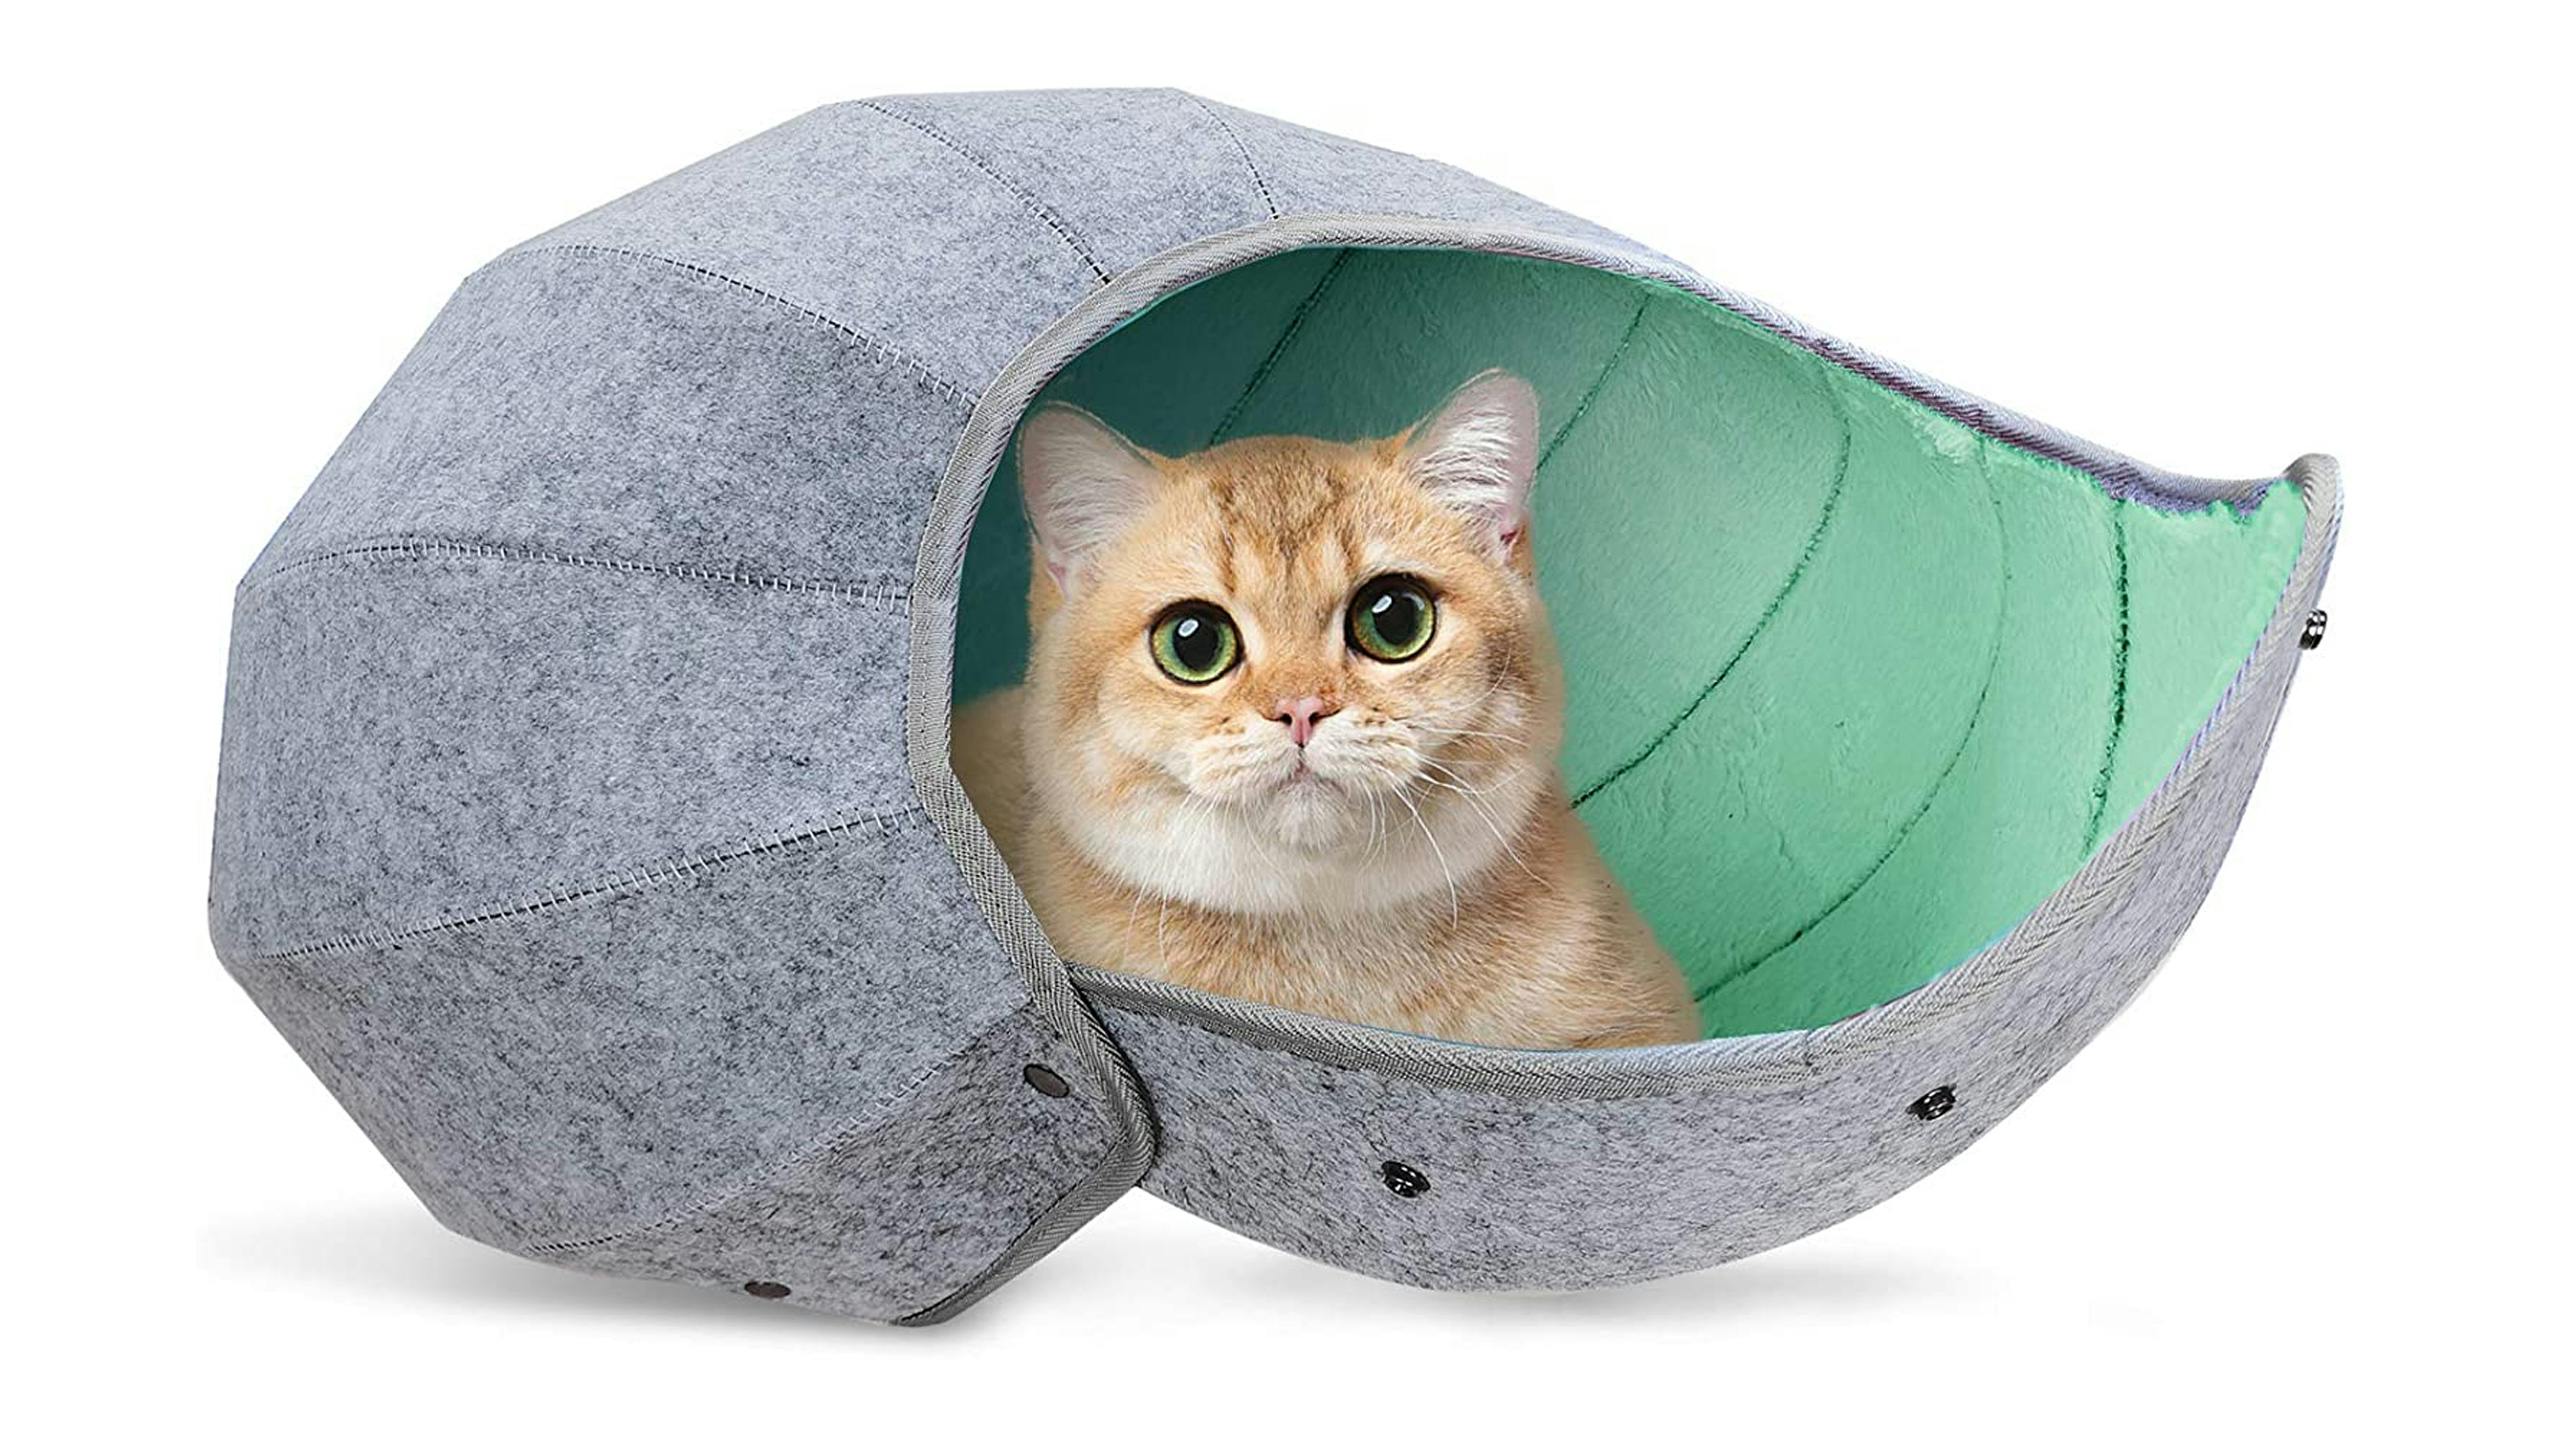 A cat perched inside a leaf cat house toy.